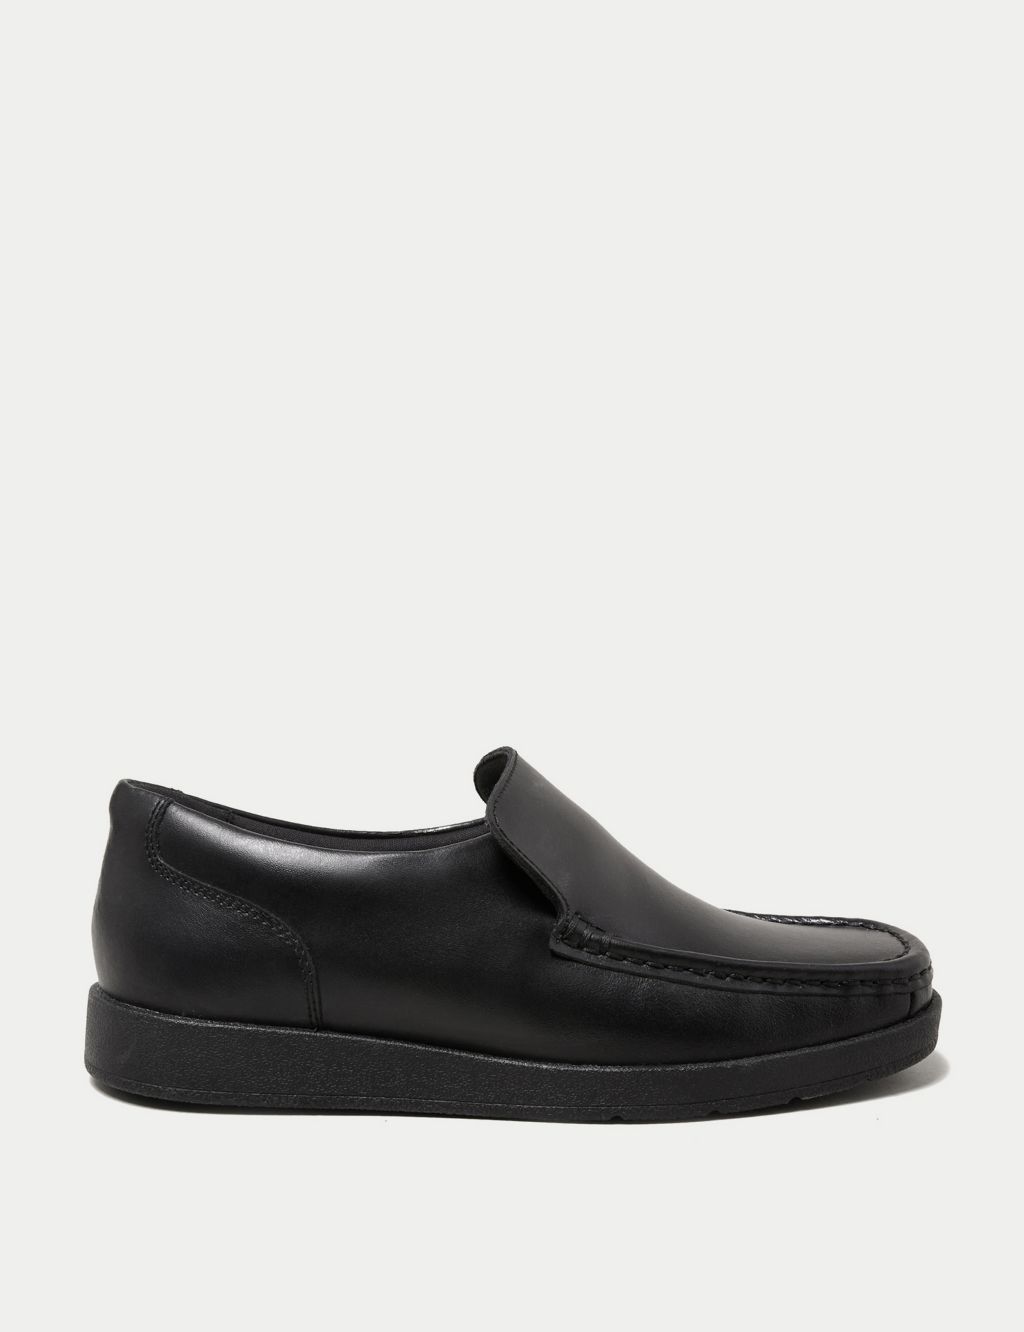 Kids' Leather Slip-on Loafer School Shoes (13 Small - 9 Large) 3 of 6